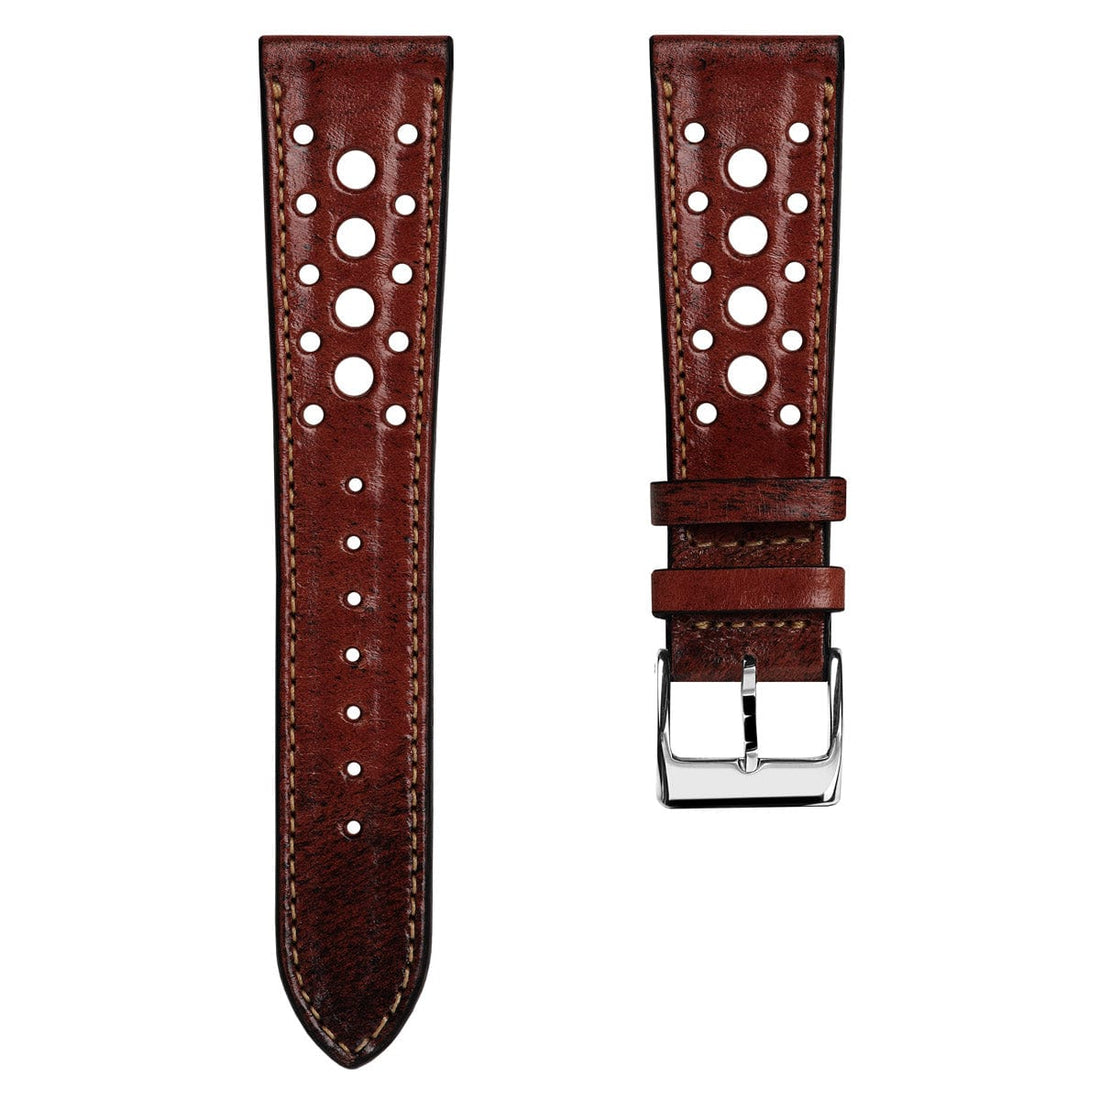 Radstock Racing Style Genuine Leather Watch Strap - Vintage Red ...